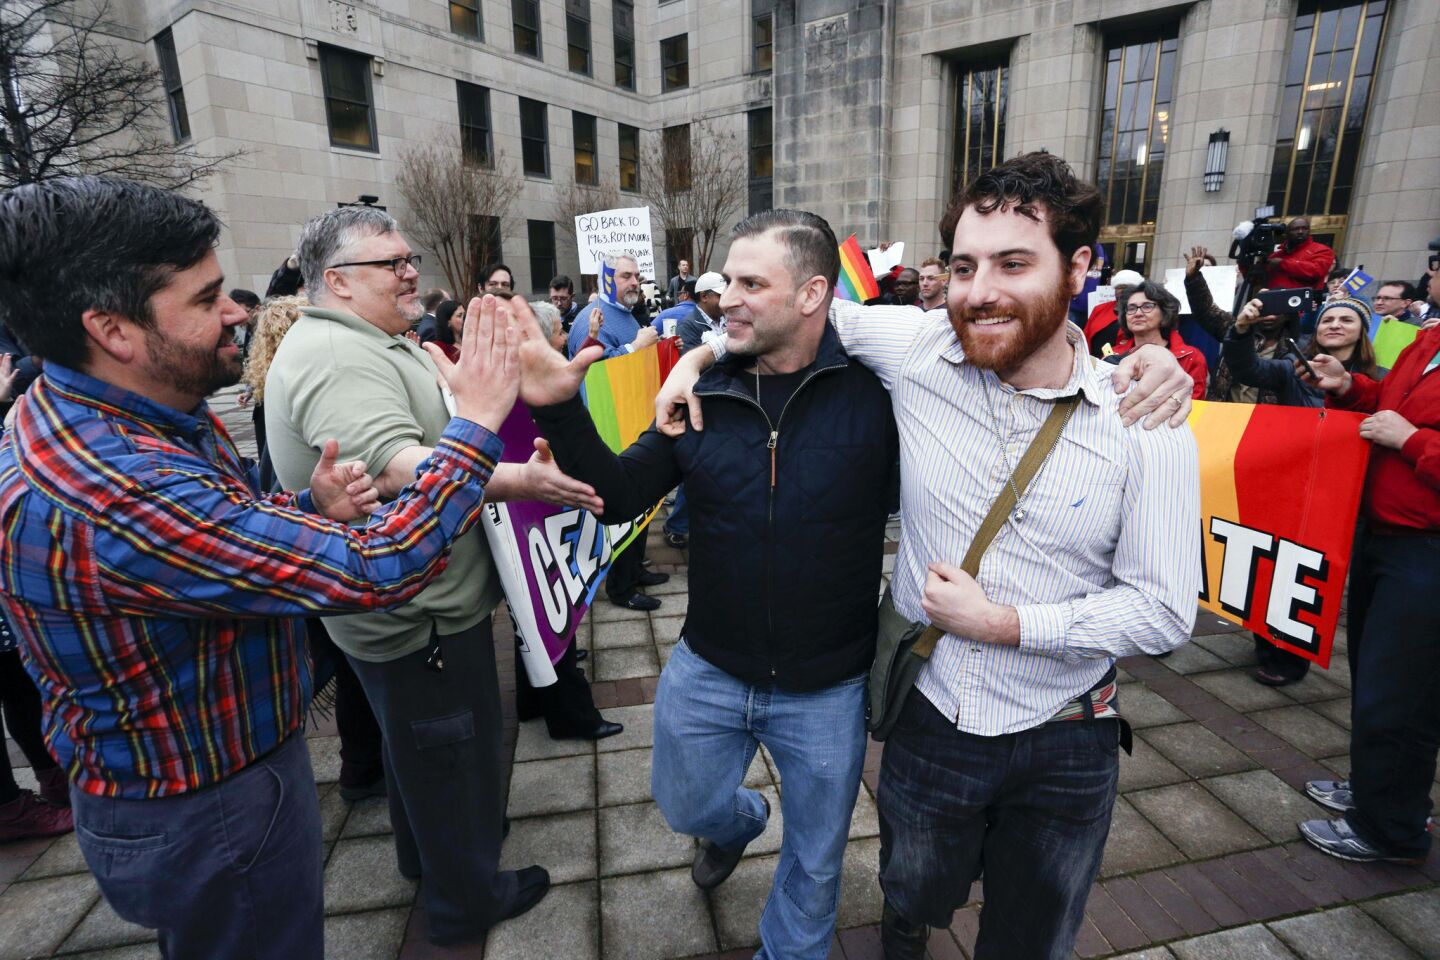 Newly married couple David Roby, center, and Erik Obermiller are cheered by supporters as they leave the Jefferson County courthouse in Birmingham.